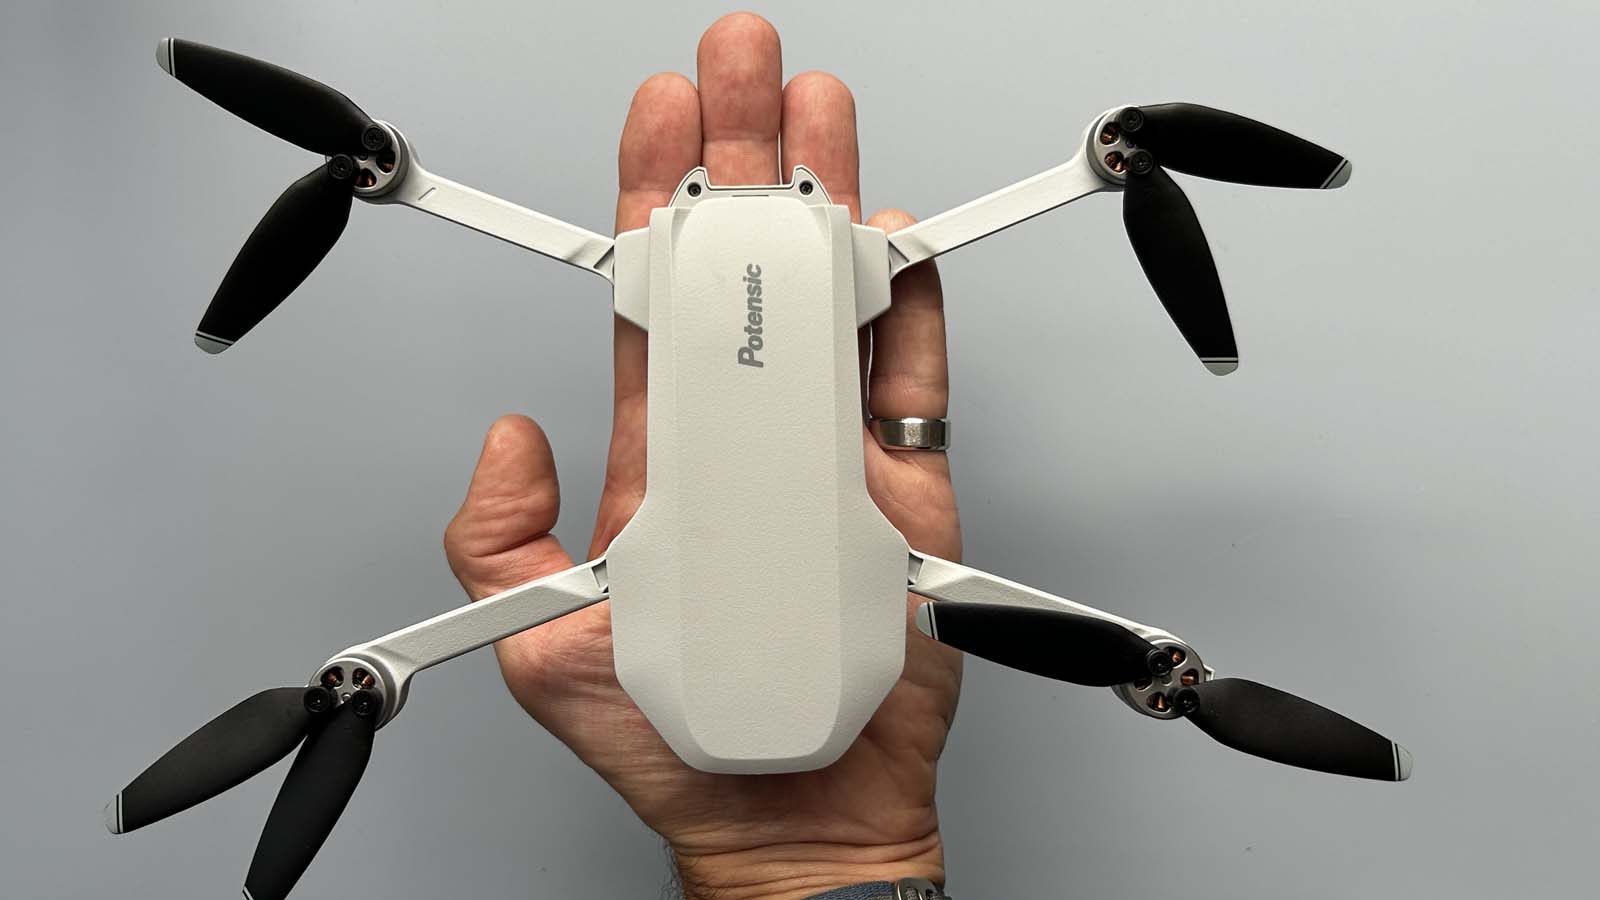 Potensic Atom review: beginner drone with 3-axis gimbal